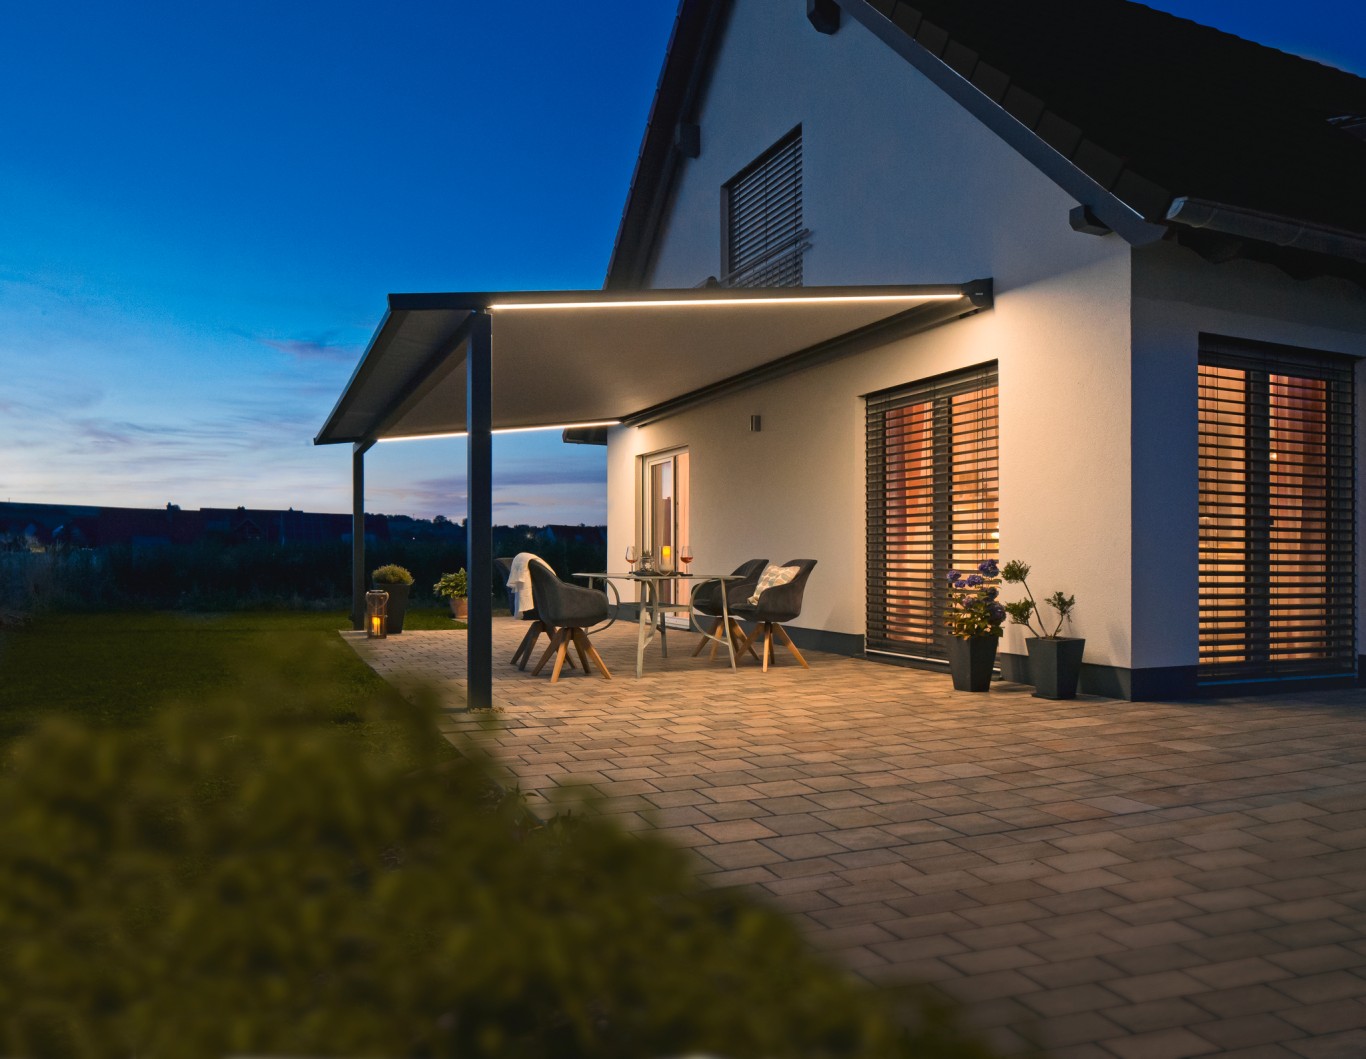 Factors to Take into Account When Buying a Patio Cover